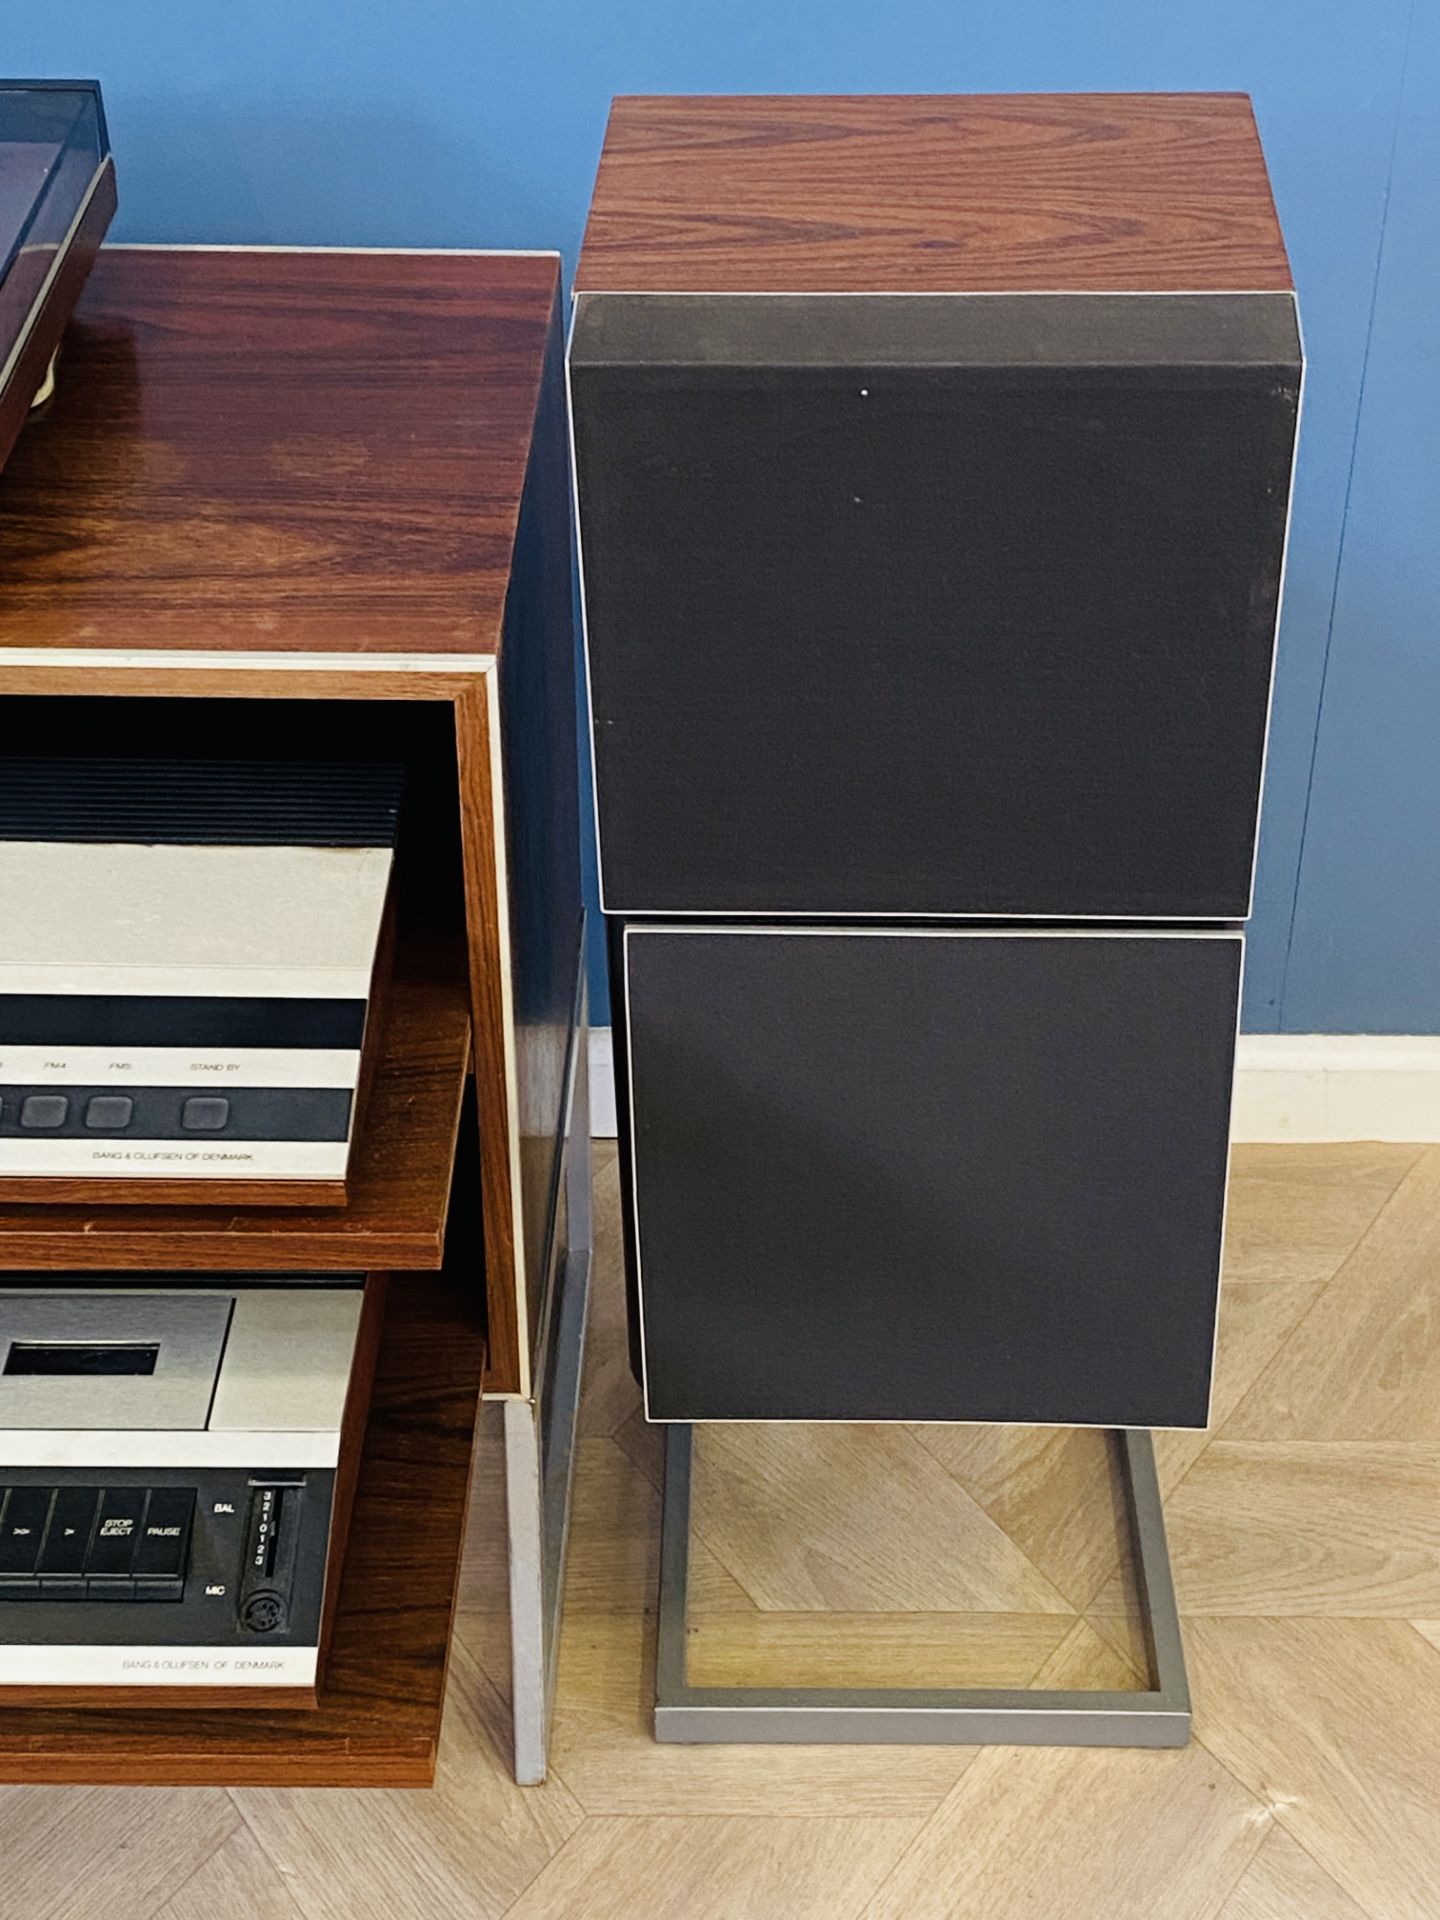 Bang & Olufsen Beomaster 1900-2; Beocord 2400, Beogram 2200 on stand; & Beovox S50's - Image 4 of 9